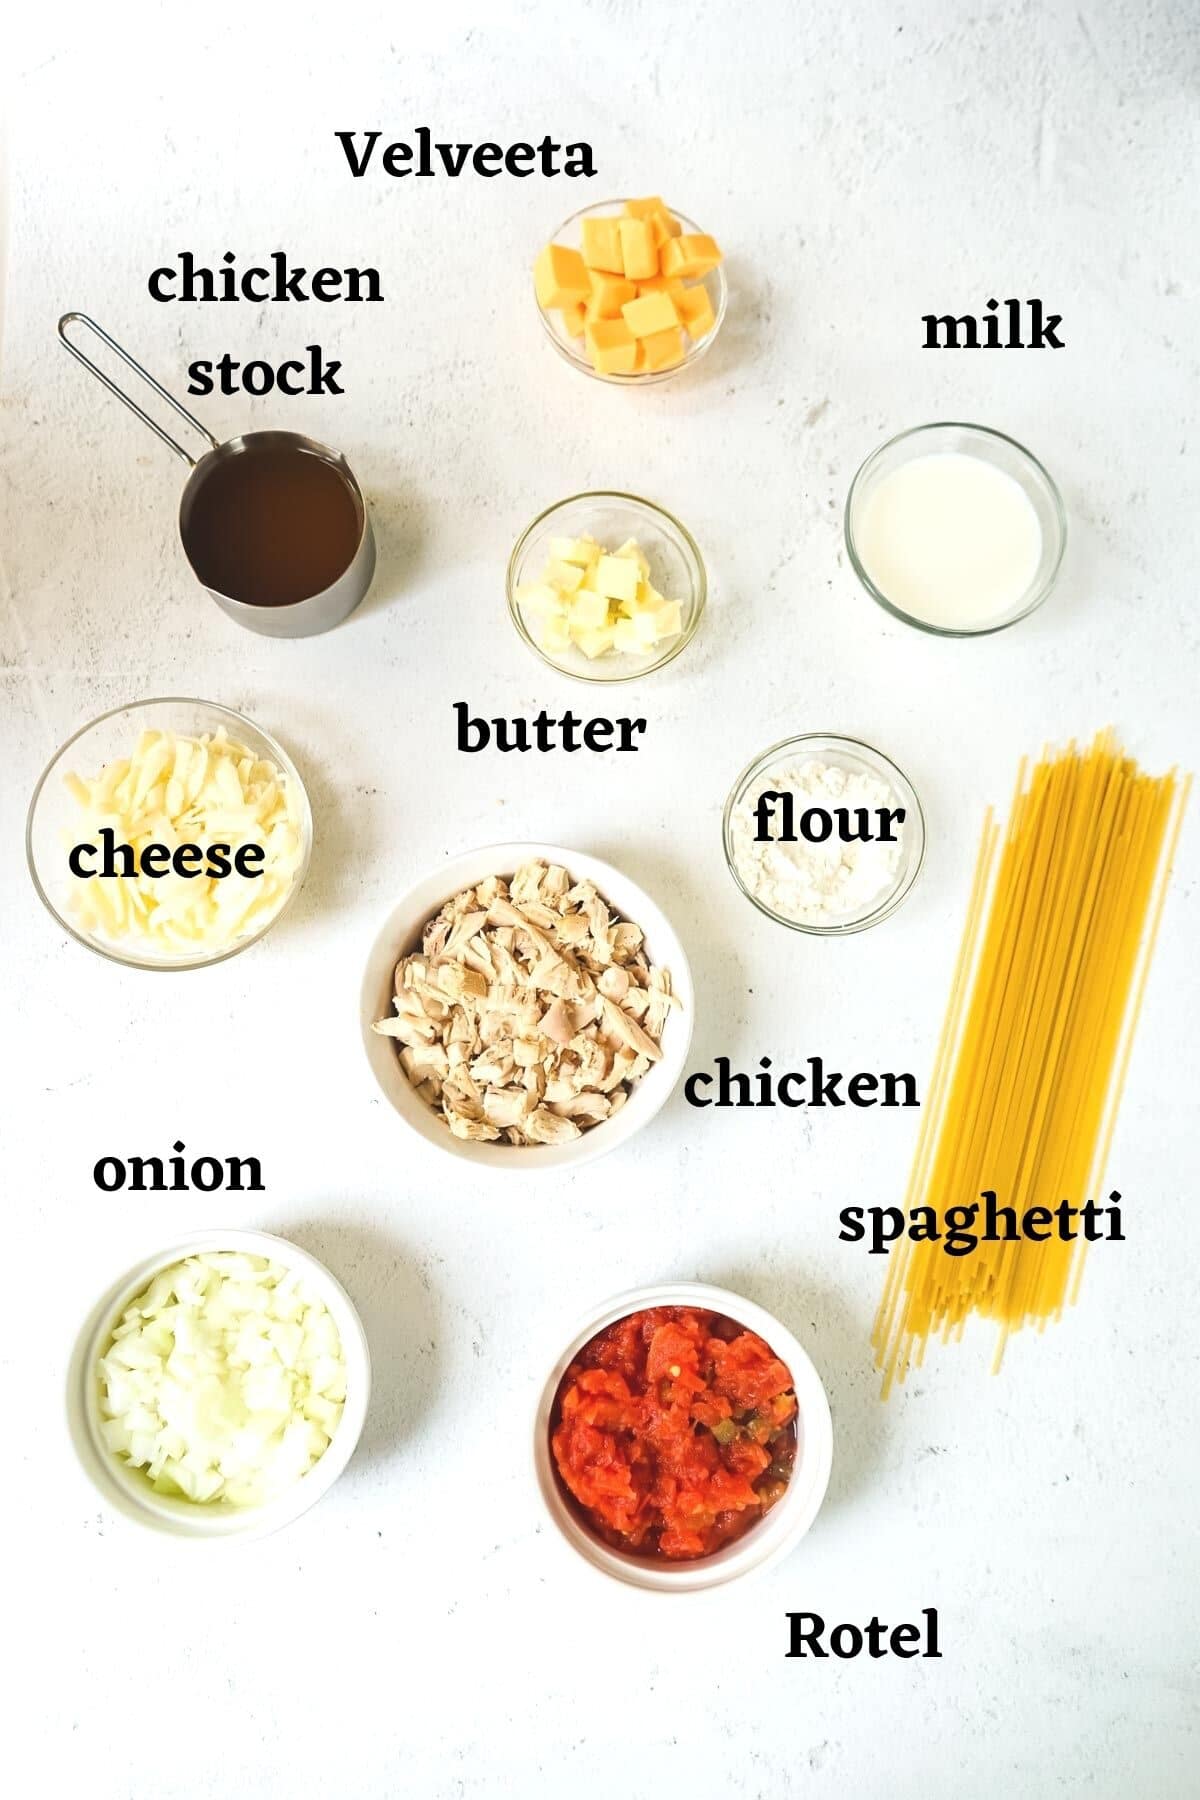 Ingredients needed for chicken spaghetti with Rotel and Velveeta.